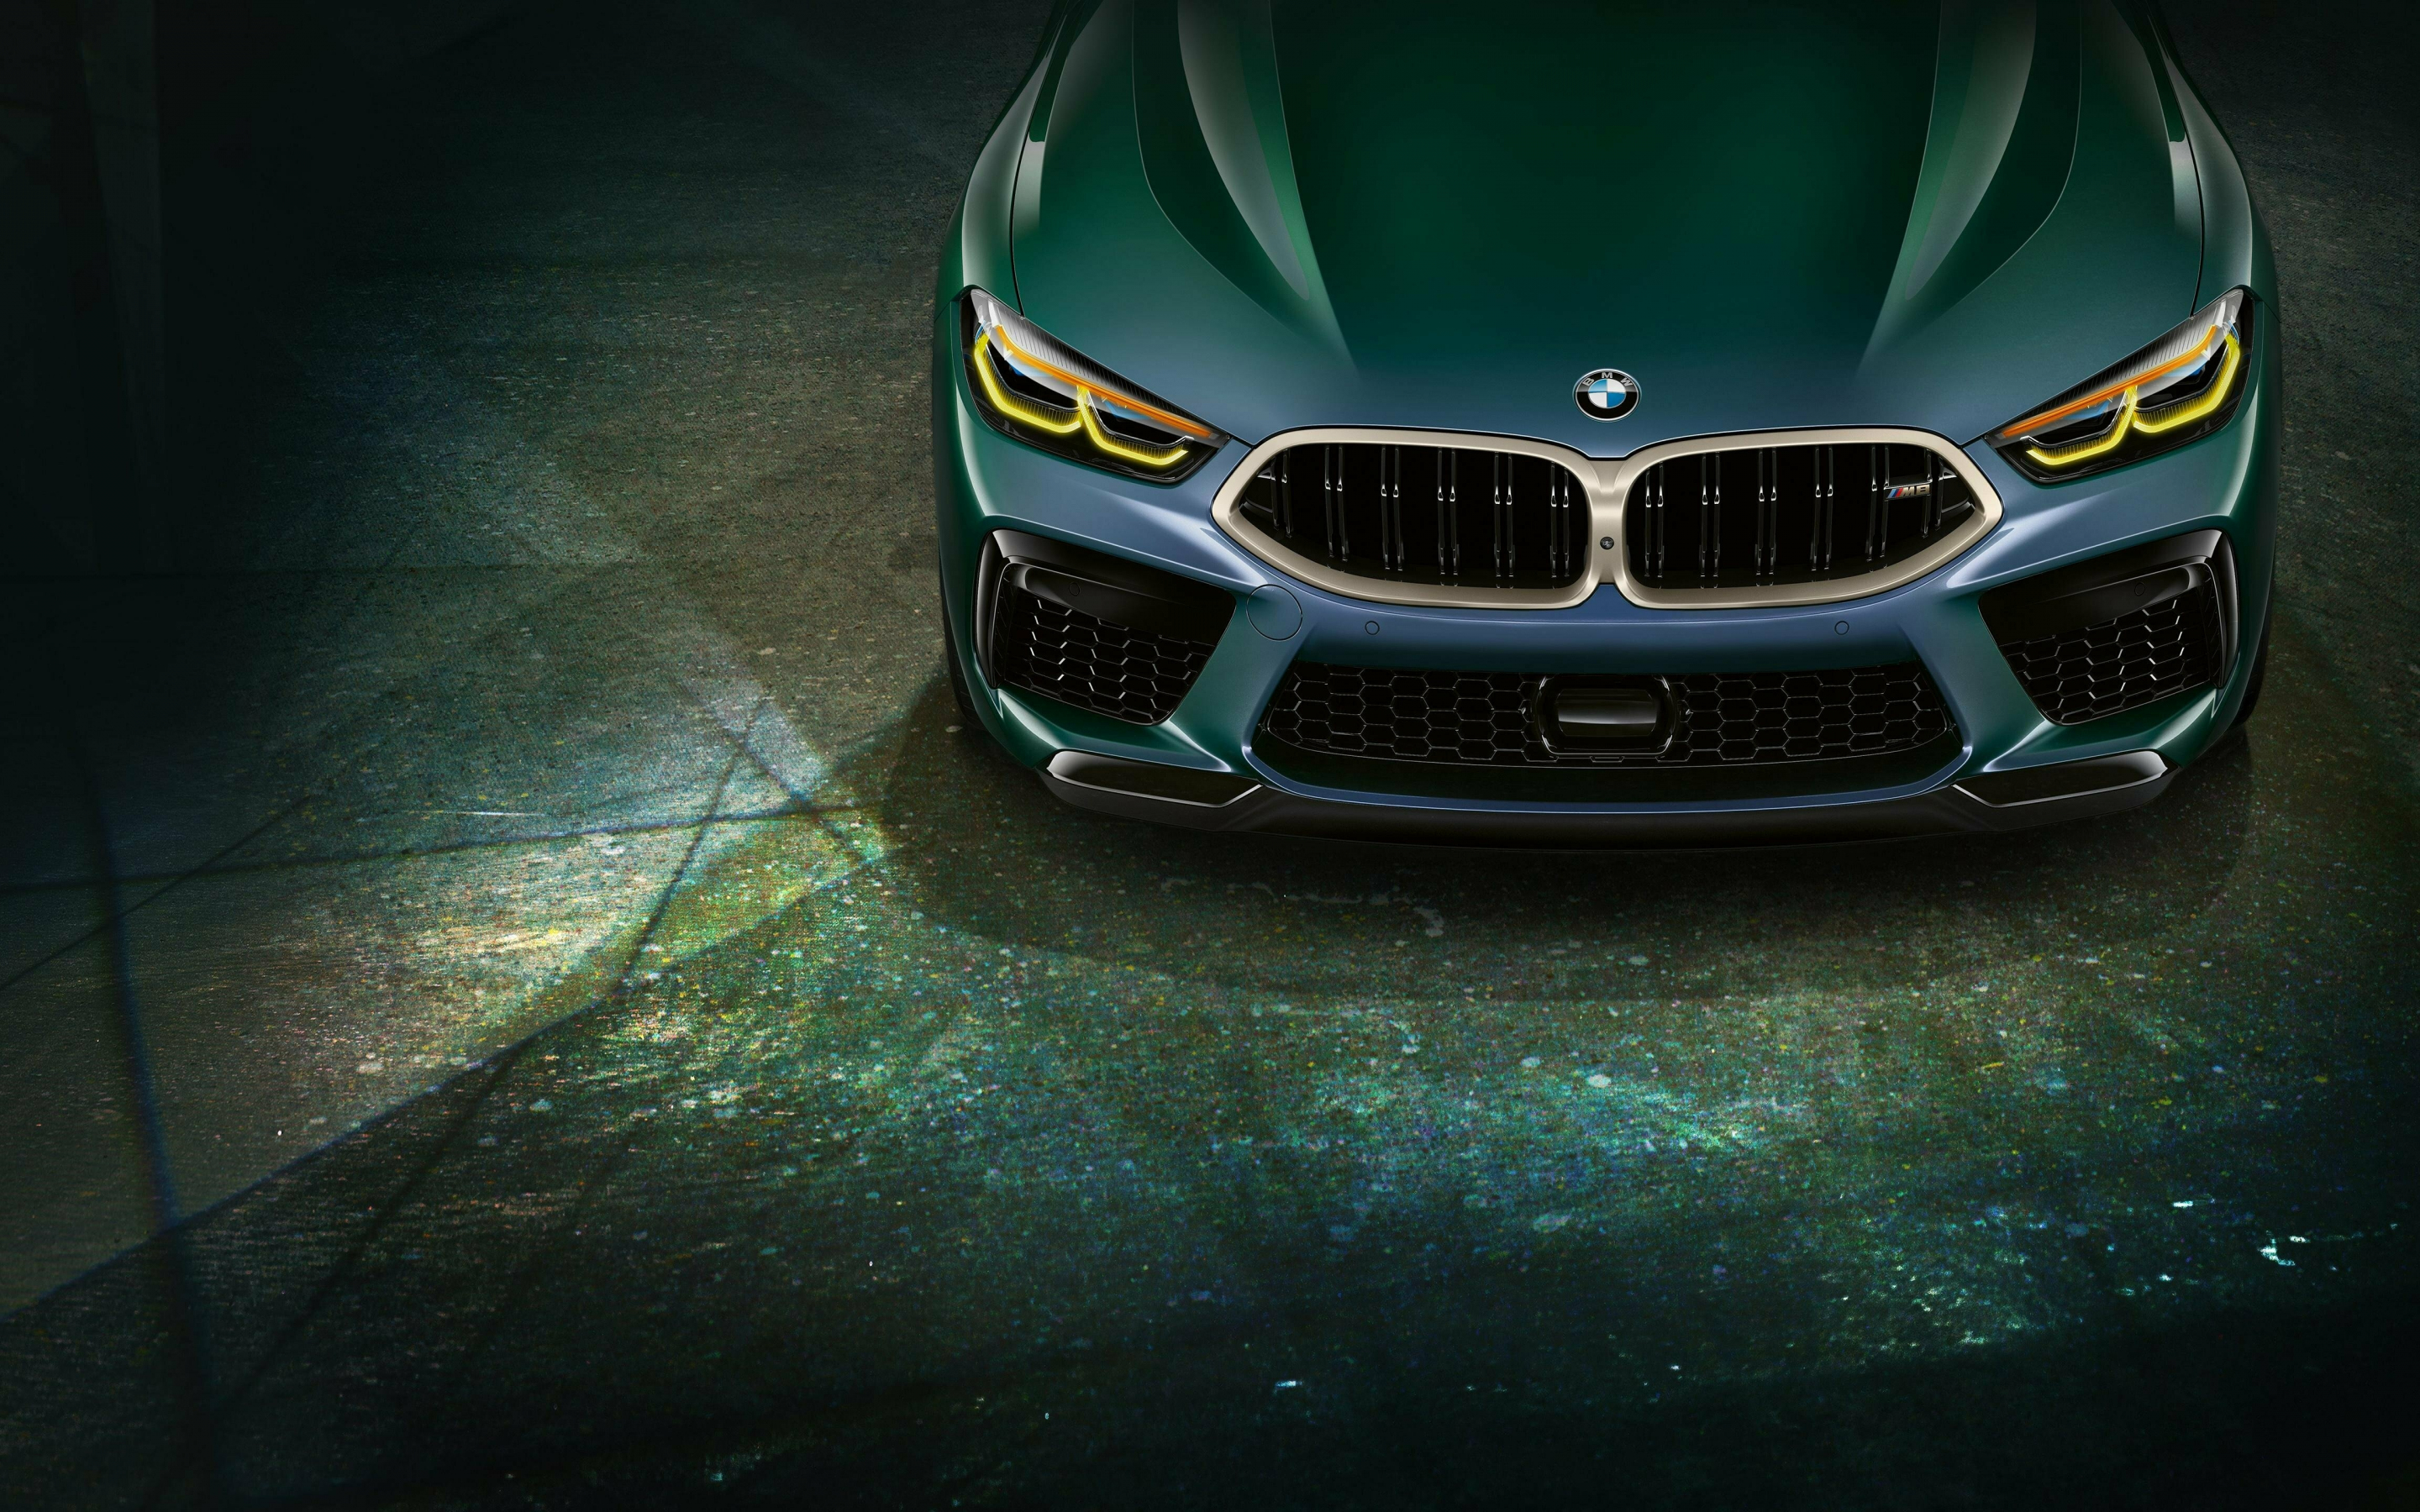 BMW M8, green and luxurious car, 2880x1800 wallpaper